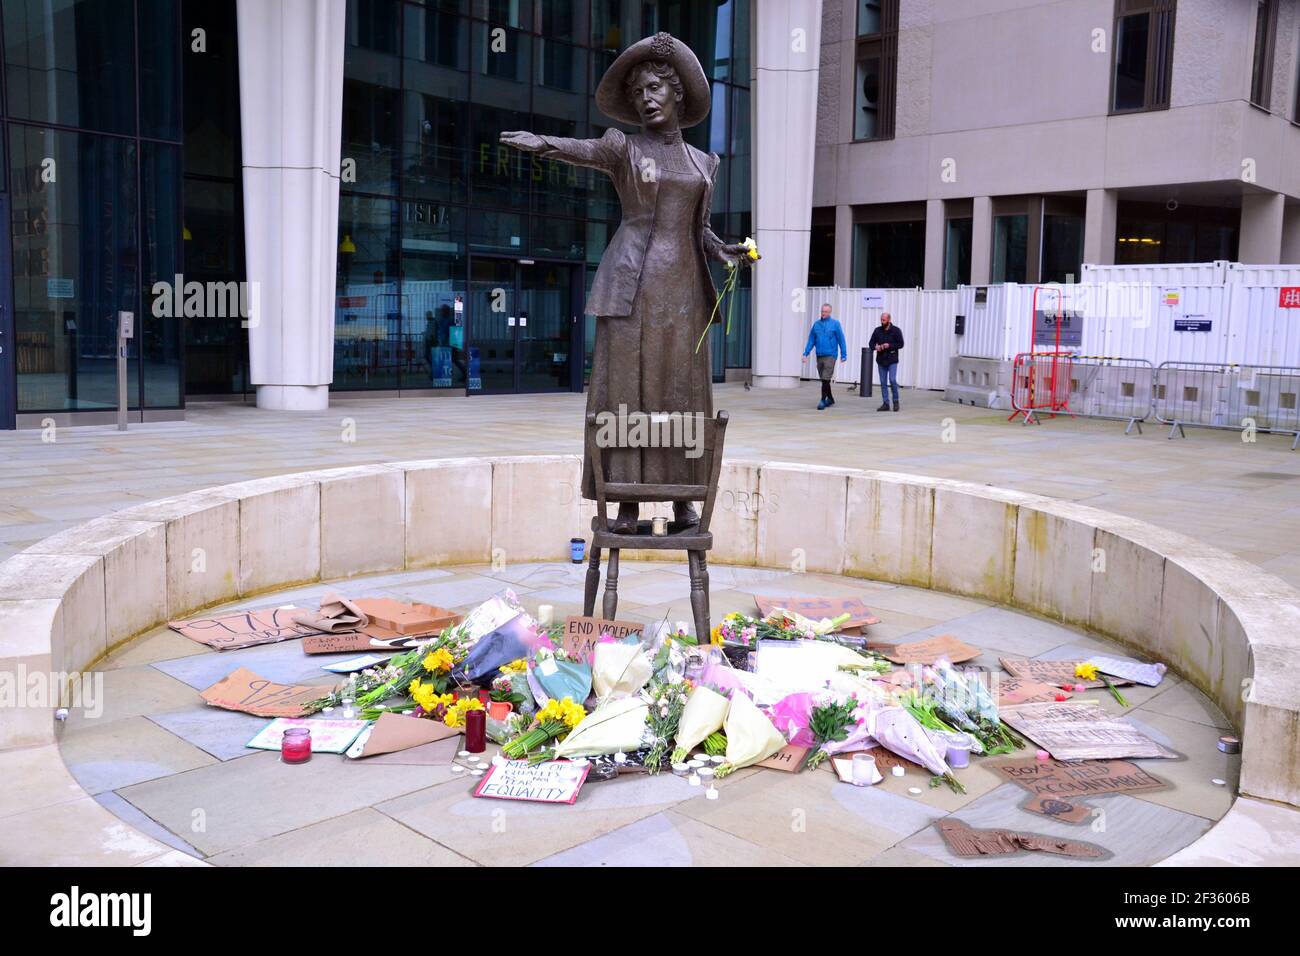 Placards which lobby for women's safety and flowers at the statue of Emmeline Pankhurst in St Peter's Square, Manchester, England, United Kingdom, left after the vigil in the memory of Sarah Everard on 13th March, 2021. A London Metropolitan police officer was charged with Sarah Everard's kidnapping and murder on 12th March. He appeared at Westminster Magistrates' Court on 13th March and was remanded in custody to appear at the Old Bailey on 16th March. Emmeline Pankhurst was the leader of the suffragette movement in the United Kingdom. The bronze statue was sculpted by Hazel Reeves. Stock Photo